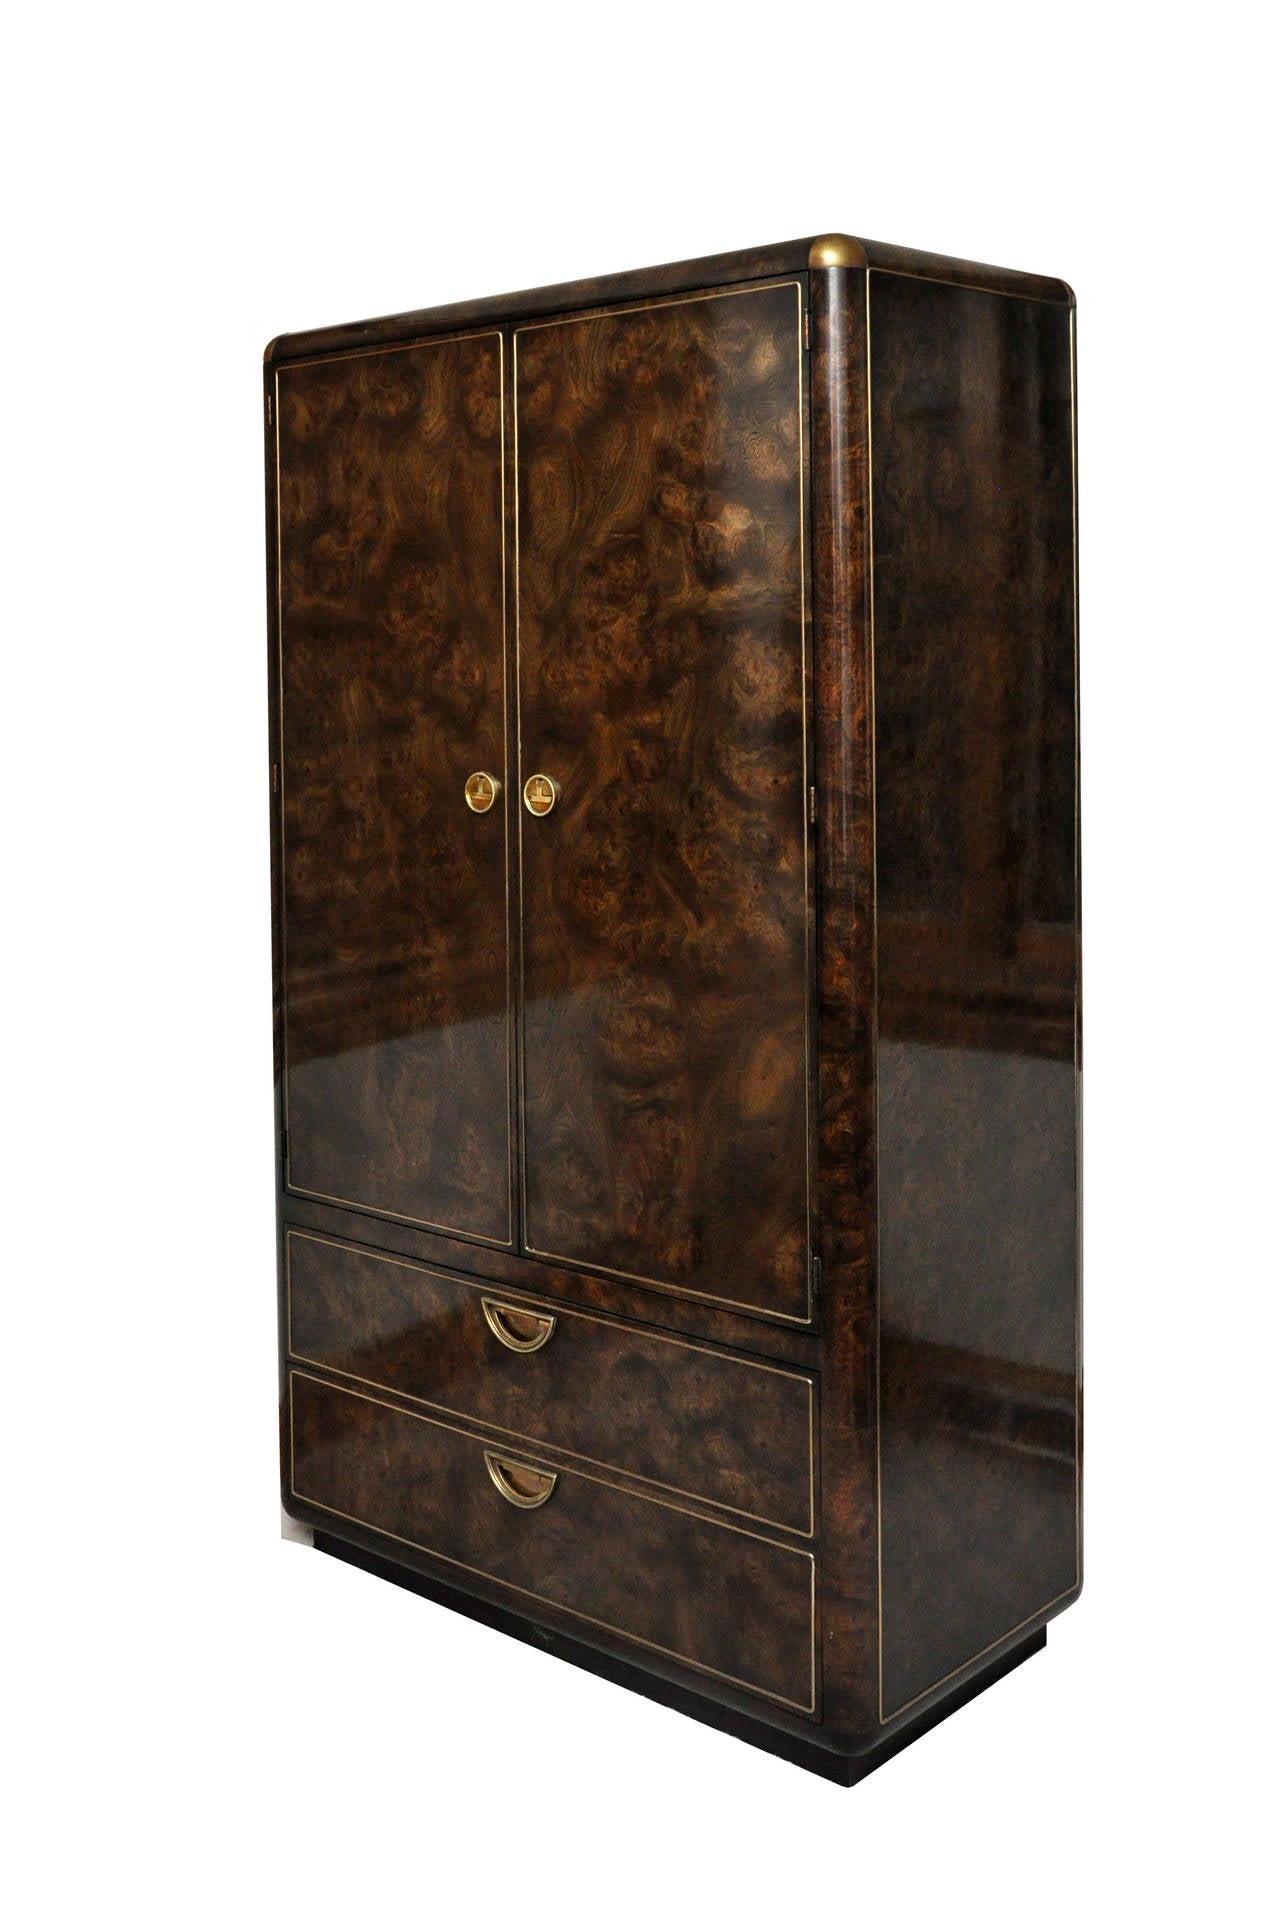 Beautiful Mastercraft Burled Amboyna Armoire with inlaid brass trim and handles. 

Interior has an open shelf storage area with four (4) full length drawers, in addition of the two (2) full length drawers on the exterior (base). 

In excellent